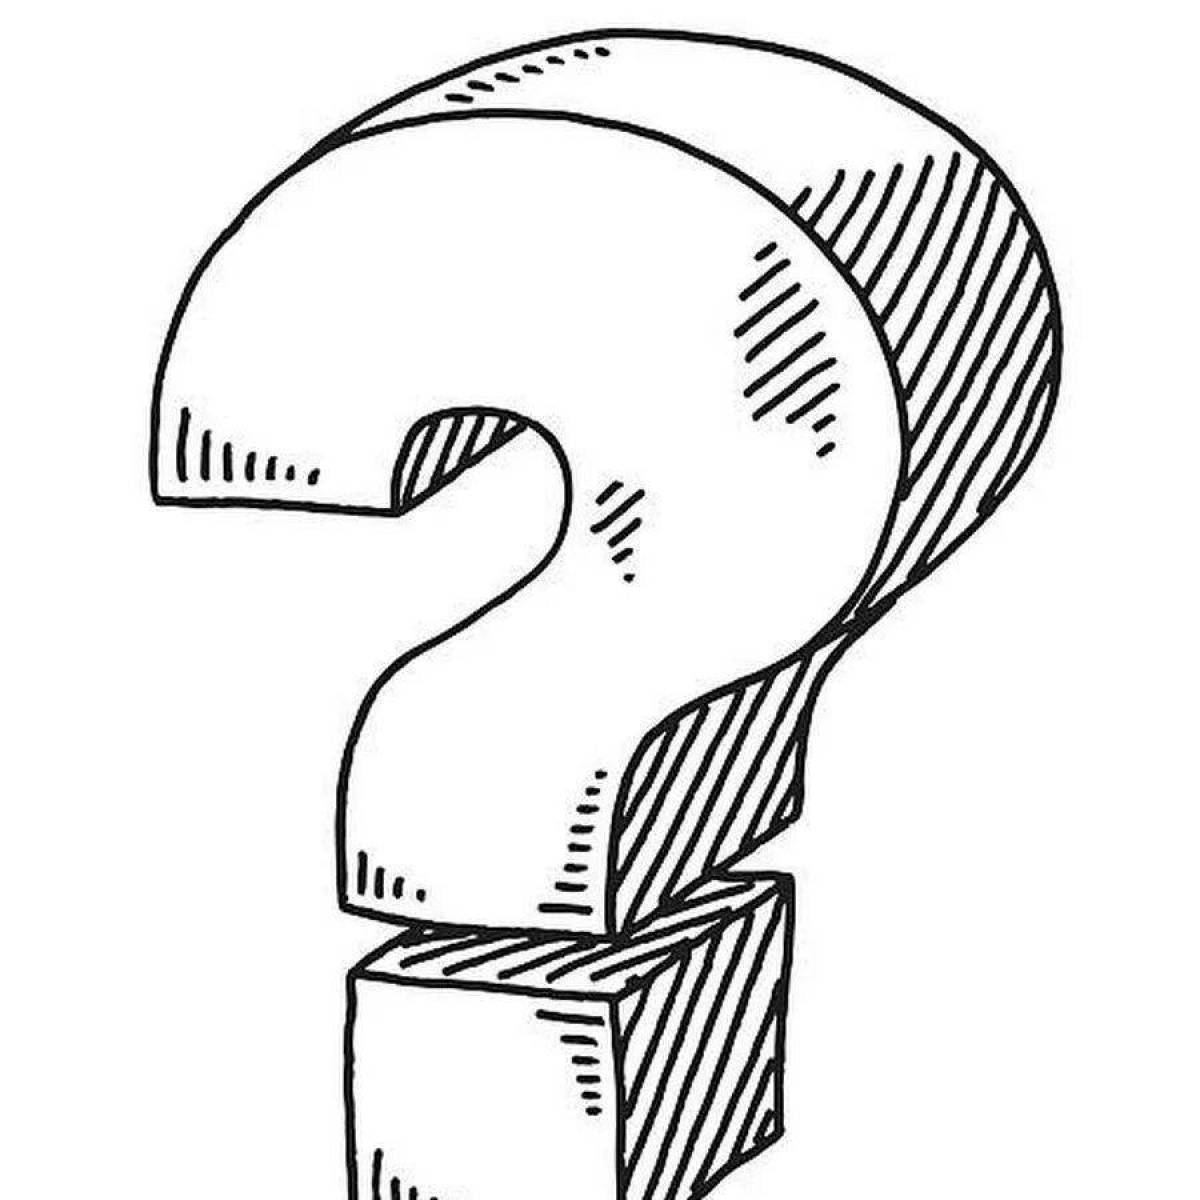 Coloring page with attractive question